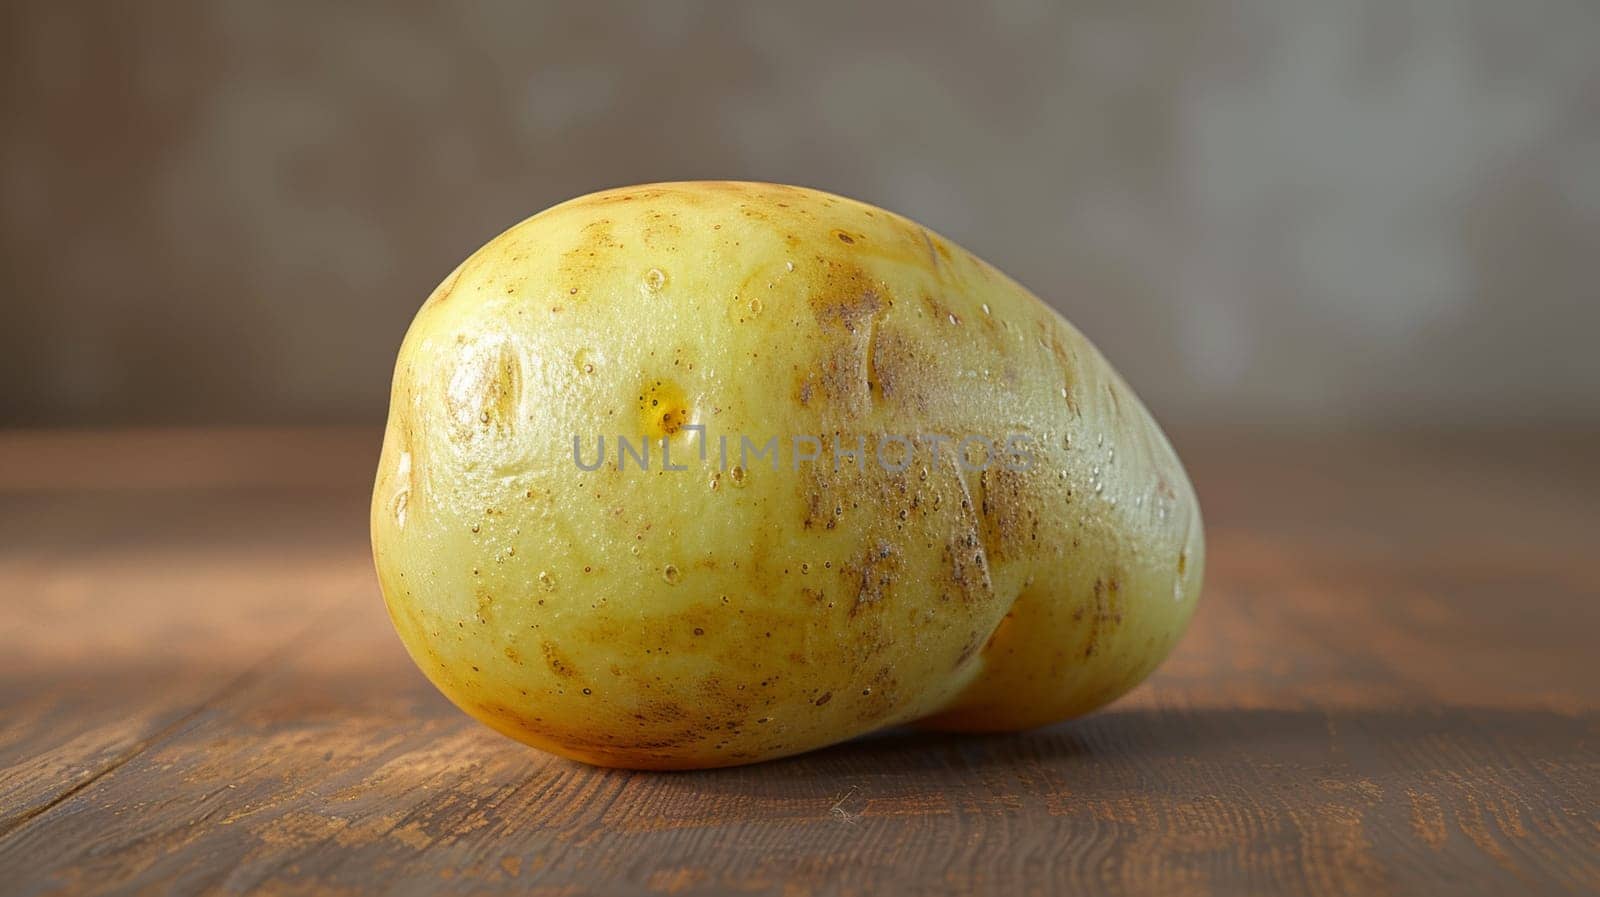 A potato on a wooden table with the skin peeled off